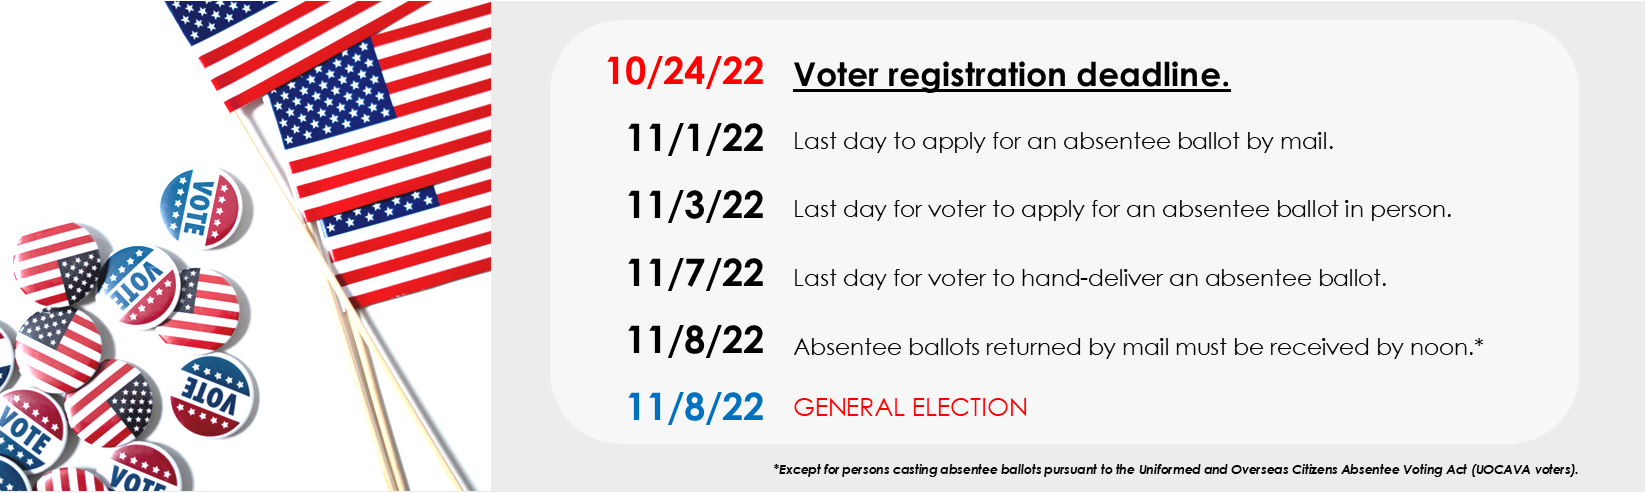 GENERAL ELECTION — NOVEMBER 8, 2022  October 24 Voter registration deadline.  November 1 Last day to apply for an absentee ballot by mail.  November 3 Last day for voter to apply for an absentee ballot in person.  November 7 Last day for voter to hand-deliver an absentee ballot.  November 8 Absentee ballots returned by mail must be received by noon.*  *Except for persons casting absentee ballots pursuant to the Uniformed and Overseas Citizens Absentee Voting Act (UOCAVA voters).